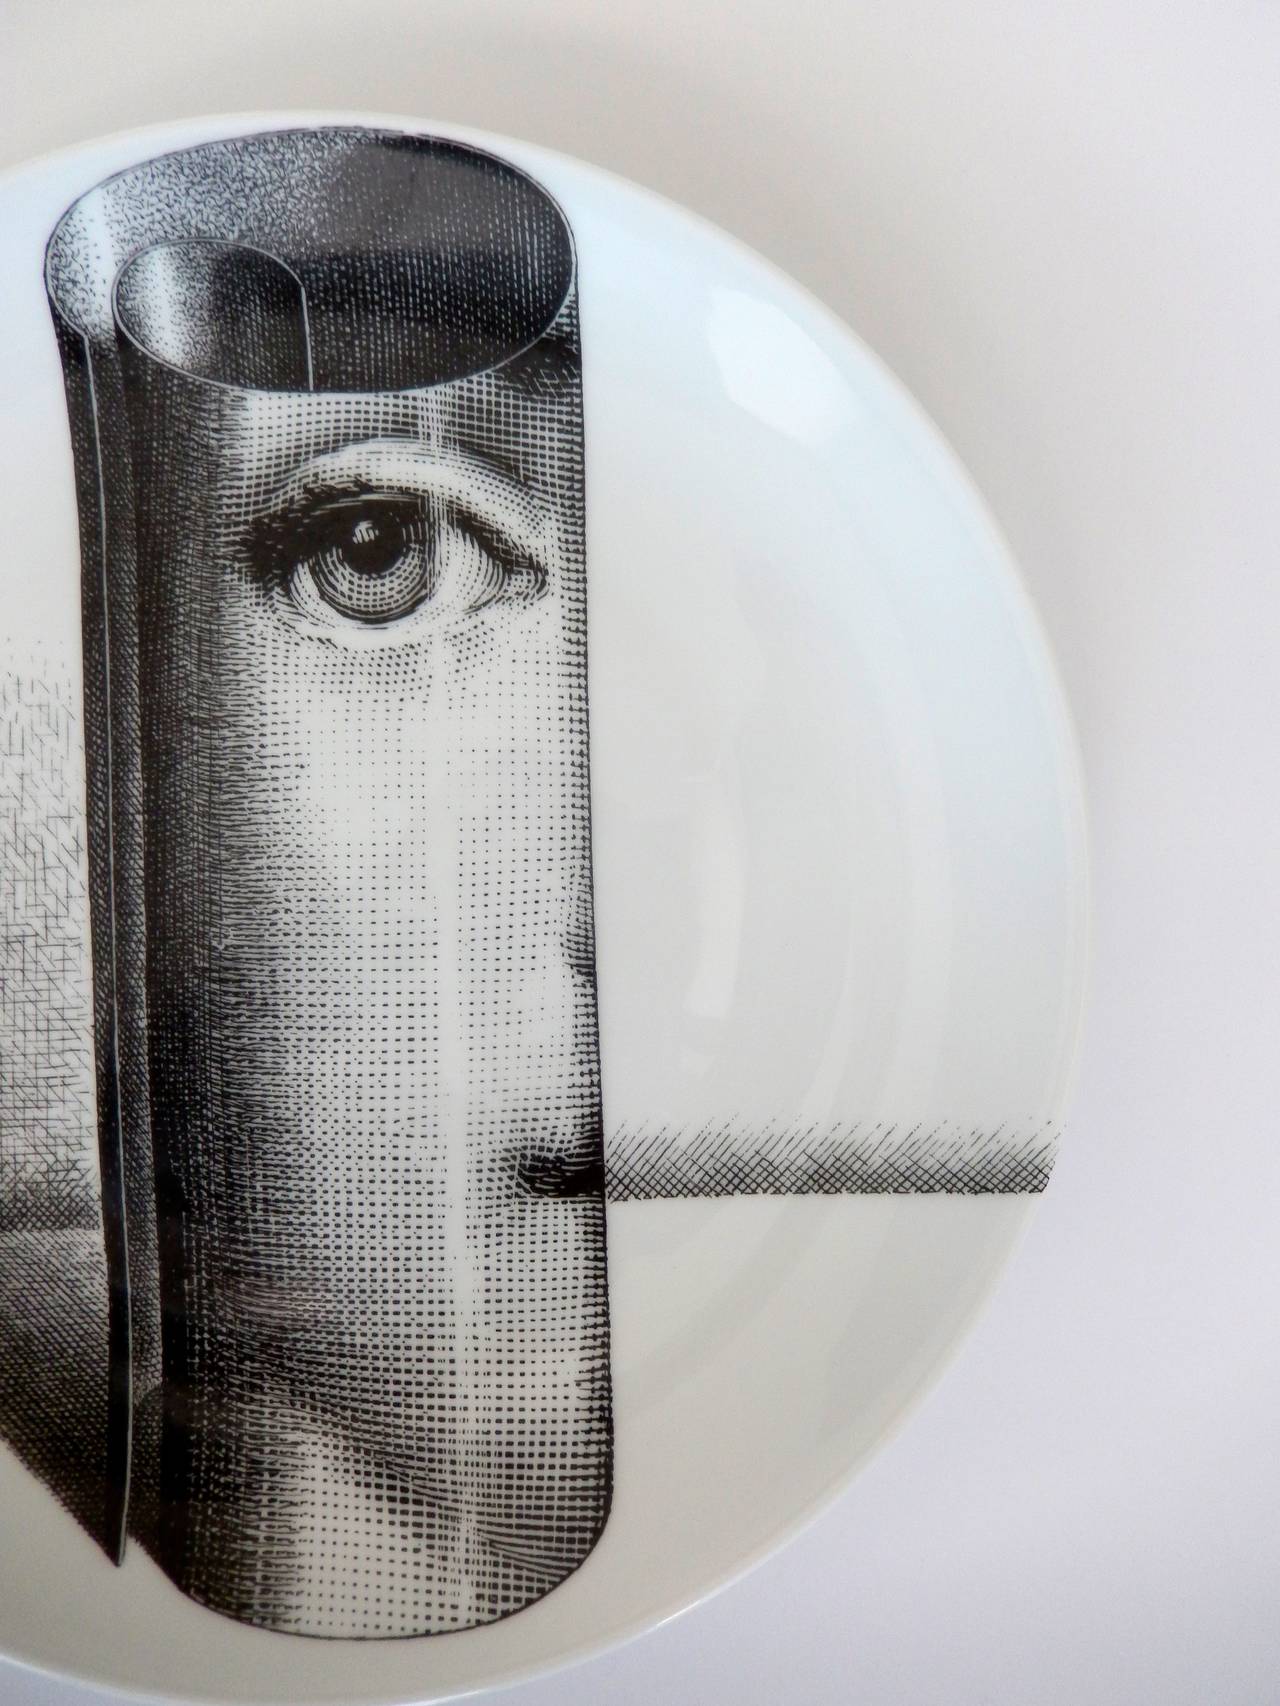 An early production plate by Fornasetti with a striking, surreal image of the eye of his muse, Lina Cavalieri, staring back at the viewer. The cylindrical form resembles a scrolled piece of paper. Very intricate and fine graphic design.

A similar